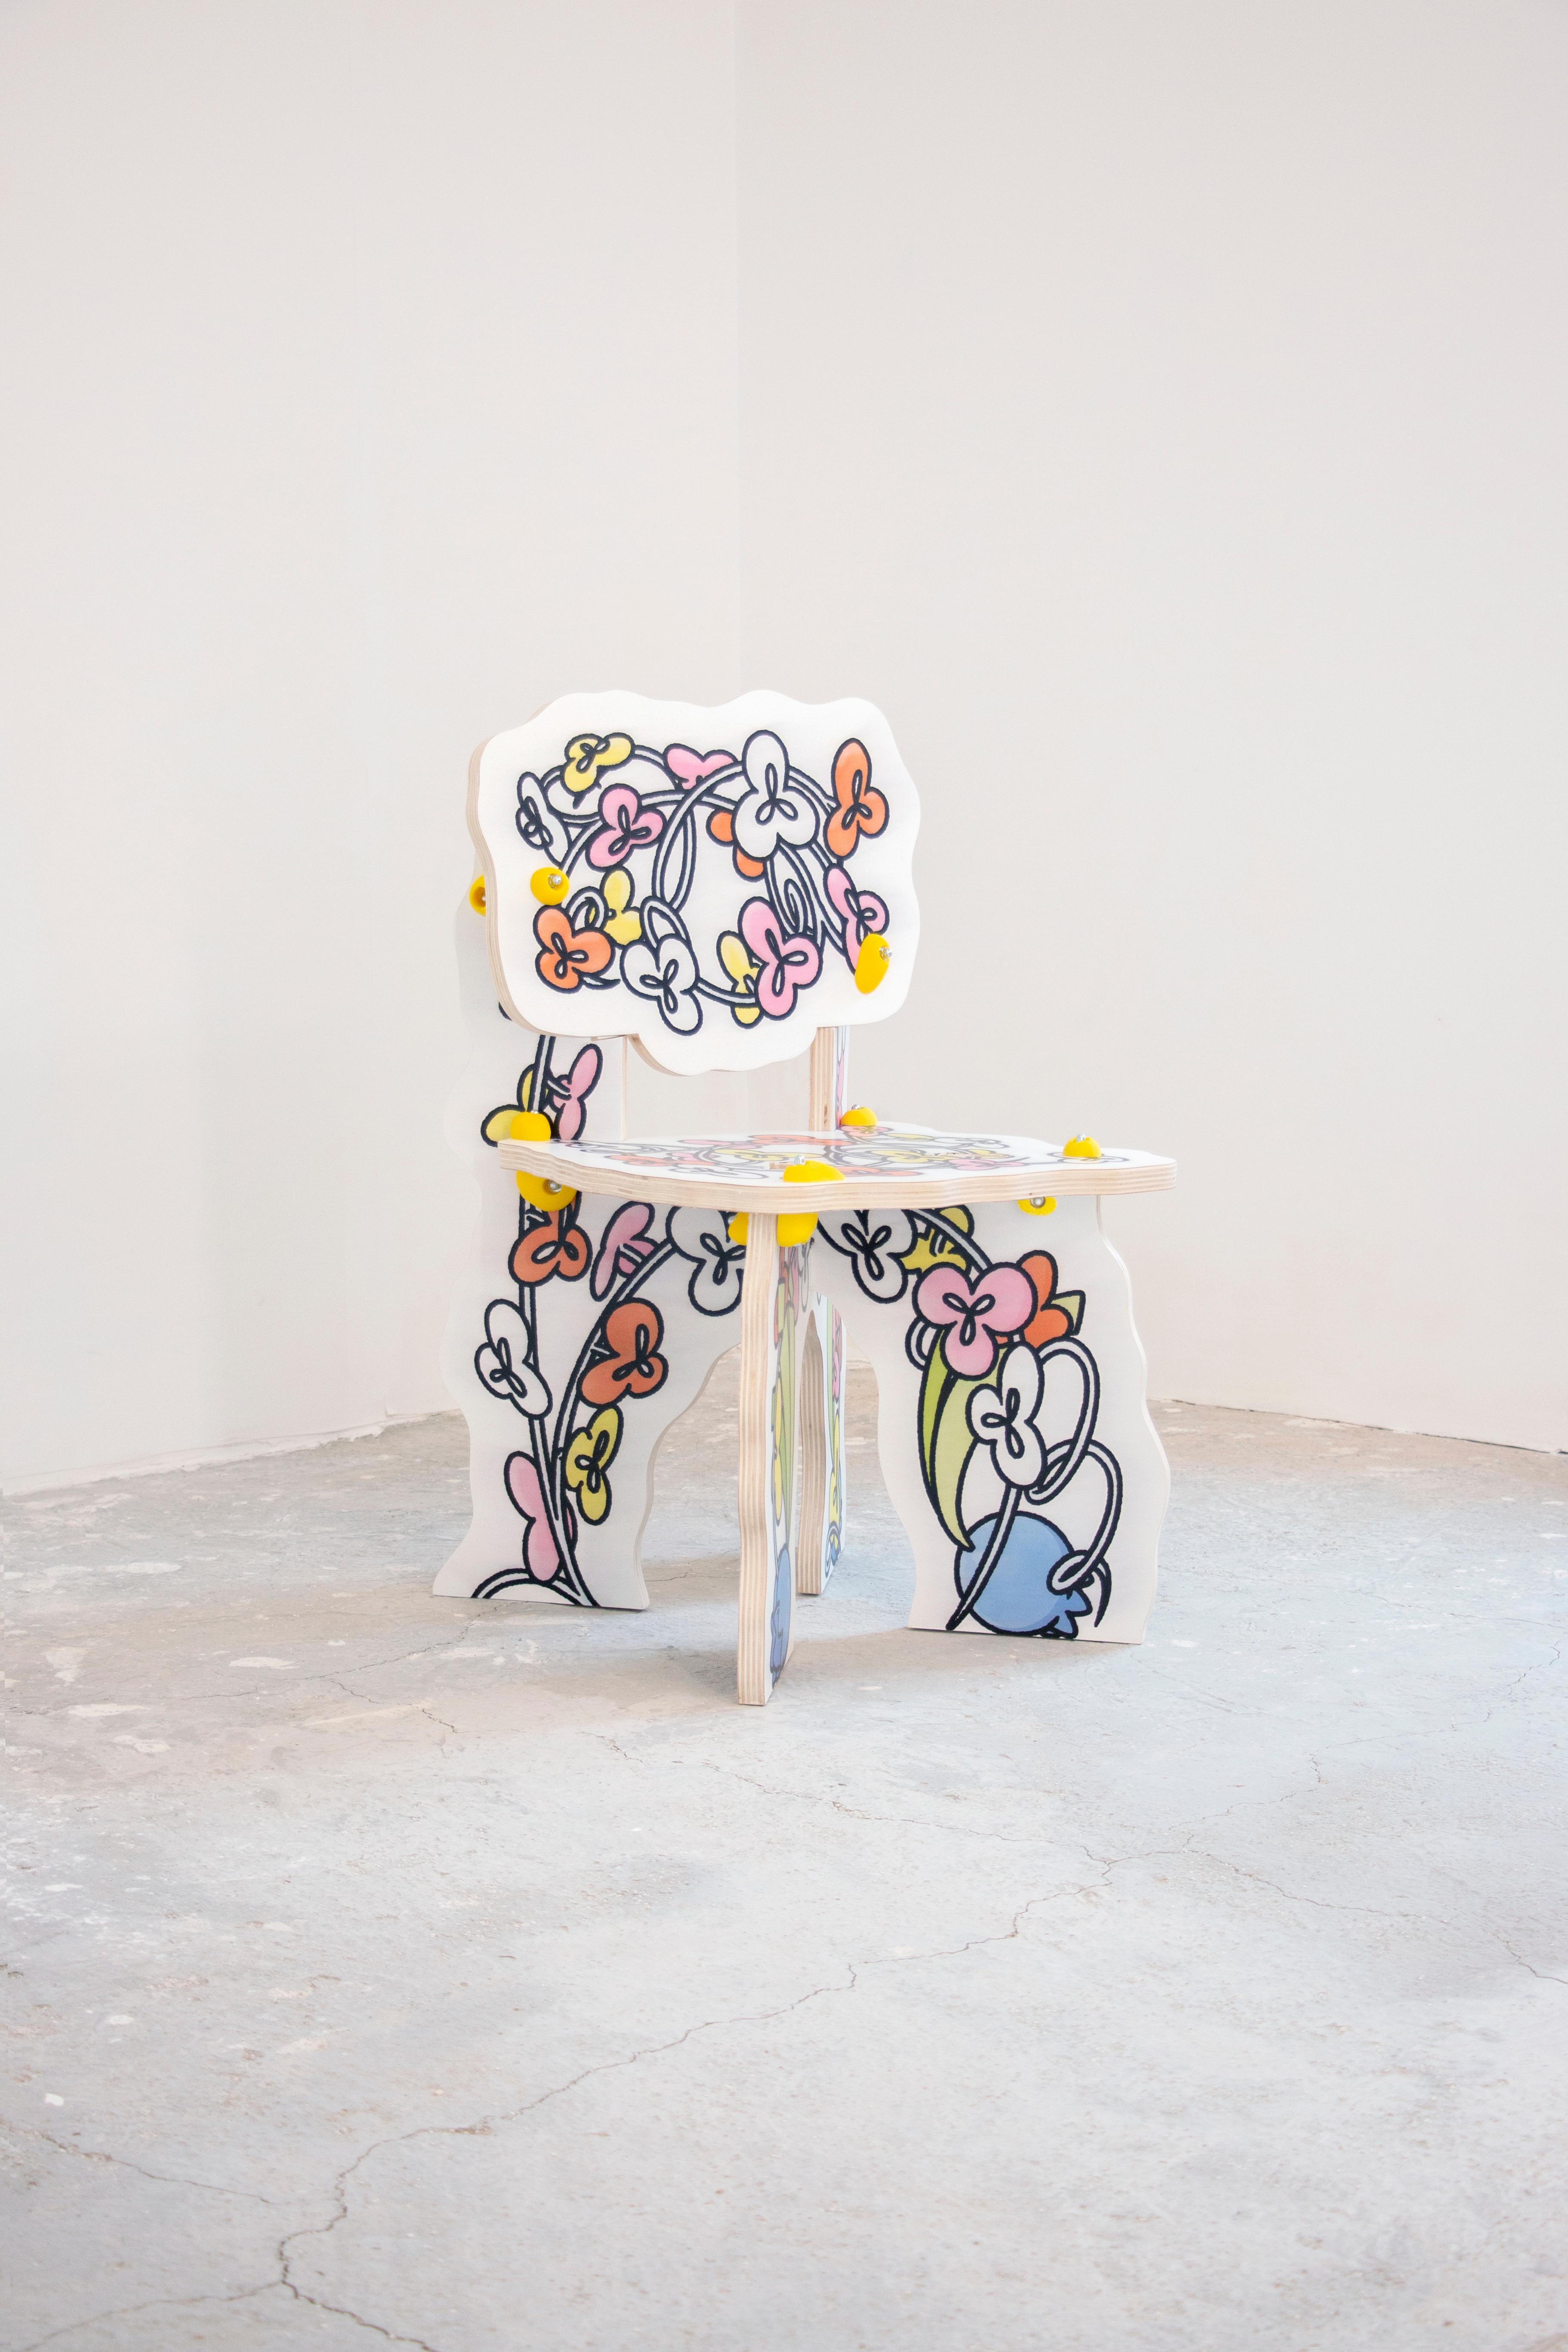 Dining Chair, part of the Plush Garden DINING ROOM series. 
Handcrafted Okoume plywood with a UV-printed floral pattern on white lacker, marine varnished. Unique handcrafted and casted connection pieces.

Plush Garden is a visual research on